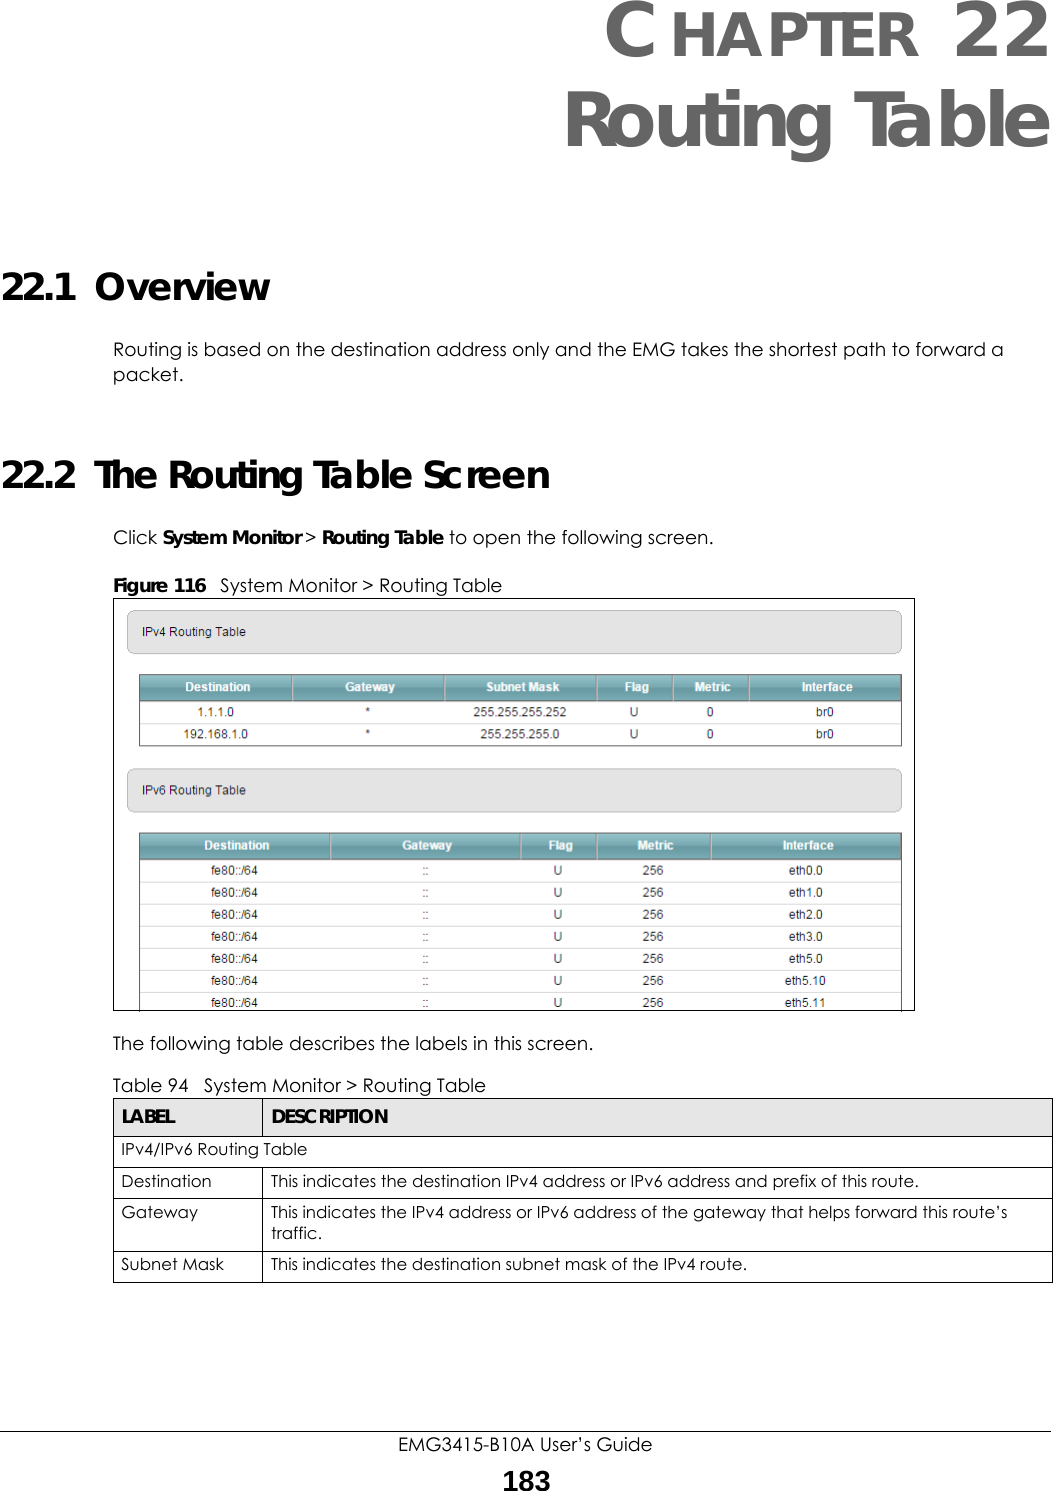 EMG3415-B10A User’s Guide183CHAPTER 22Routing Table22.1  OverviewRouting is based on the destination address only and the EMG takes the shortest path to forward a packet.22.2  The Routing Table ScreenClick System Monitor &gt; Routing Table to open the following screen.Figure 116   System Monitor &gt; Routing TableThe following table describes the labels in this screen.Table 94   System Monitor &gt; Routing TableLABEL DESCRIPTIONIPv4/IPv6 Routing TableDestination This indicates the destination IPv4 address or IPv6 address and prefix of this route.Gateway This indicates the IPv4 address or IPv6 address of the gateway that helps forward this route’s traffic.Subnet Mask This indicates the destination subnet mask of the IPv4 route.